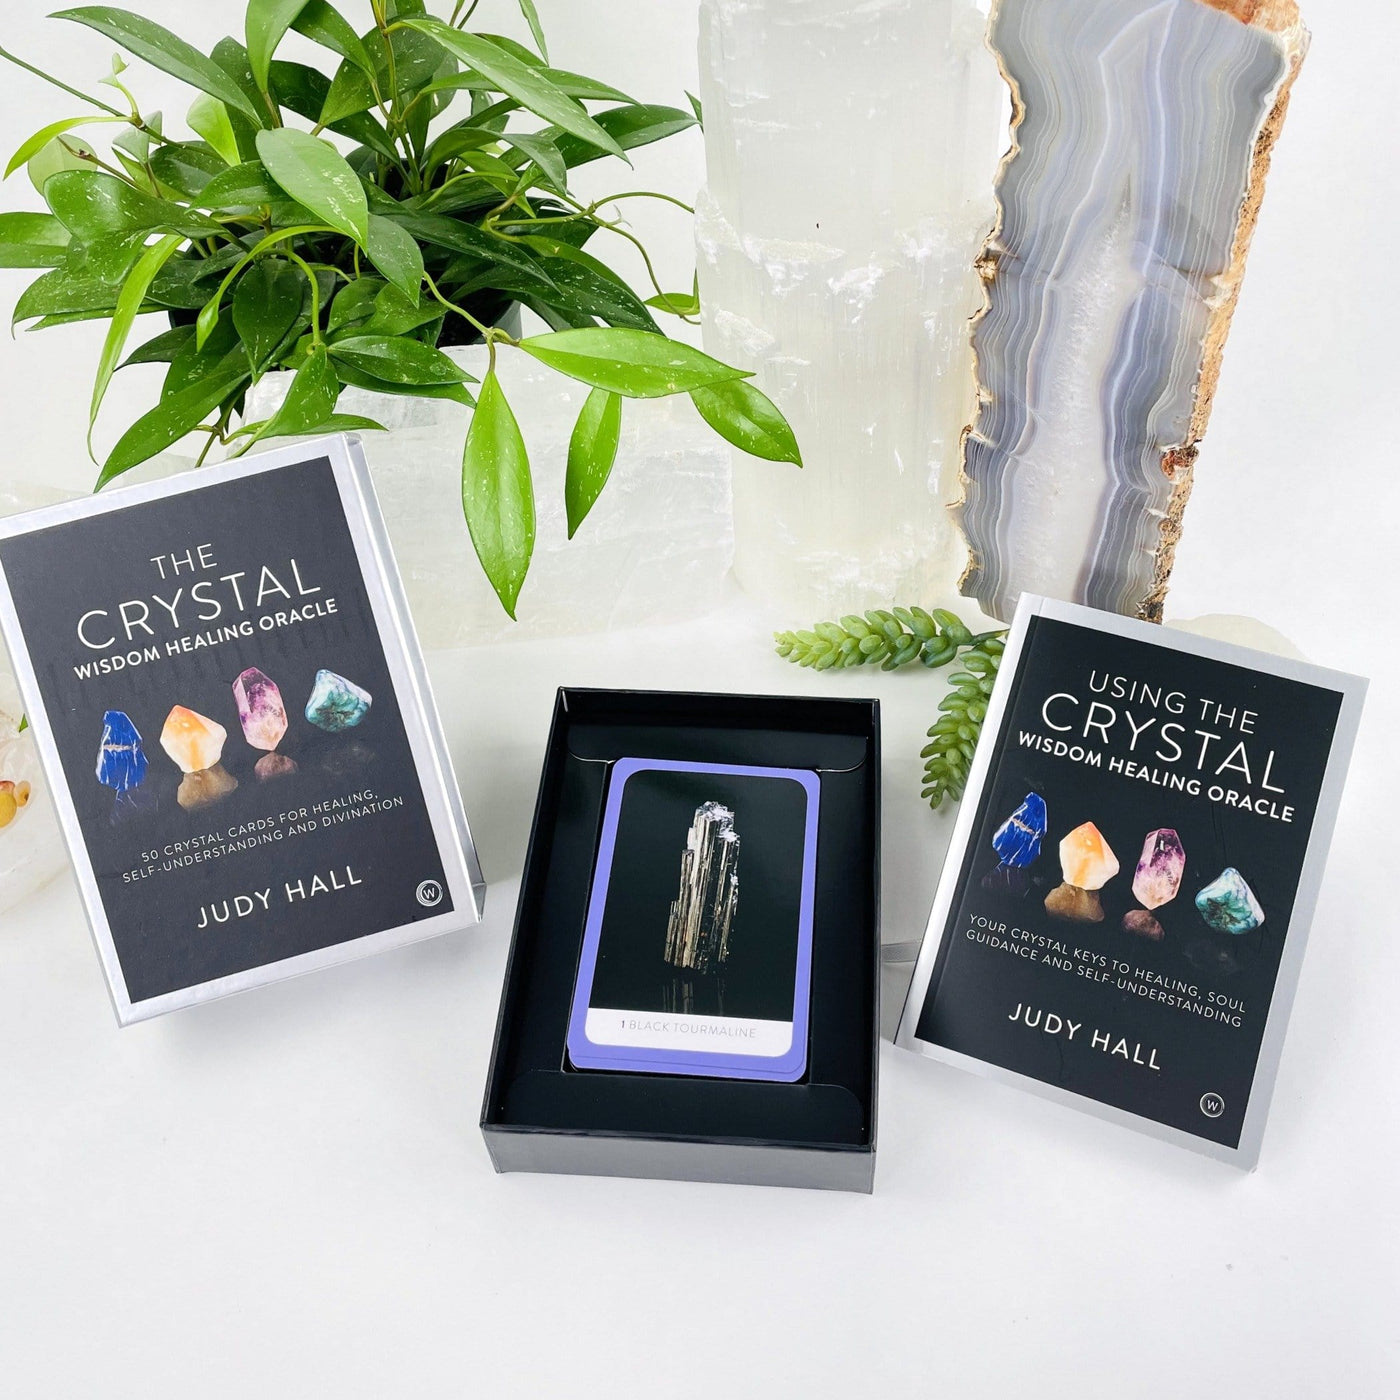 The Crystal Wisdom Healing Oracle by Judy Hall  box opened to show the card 